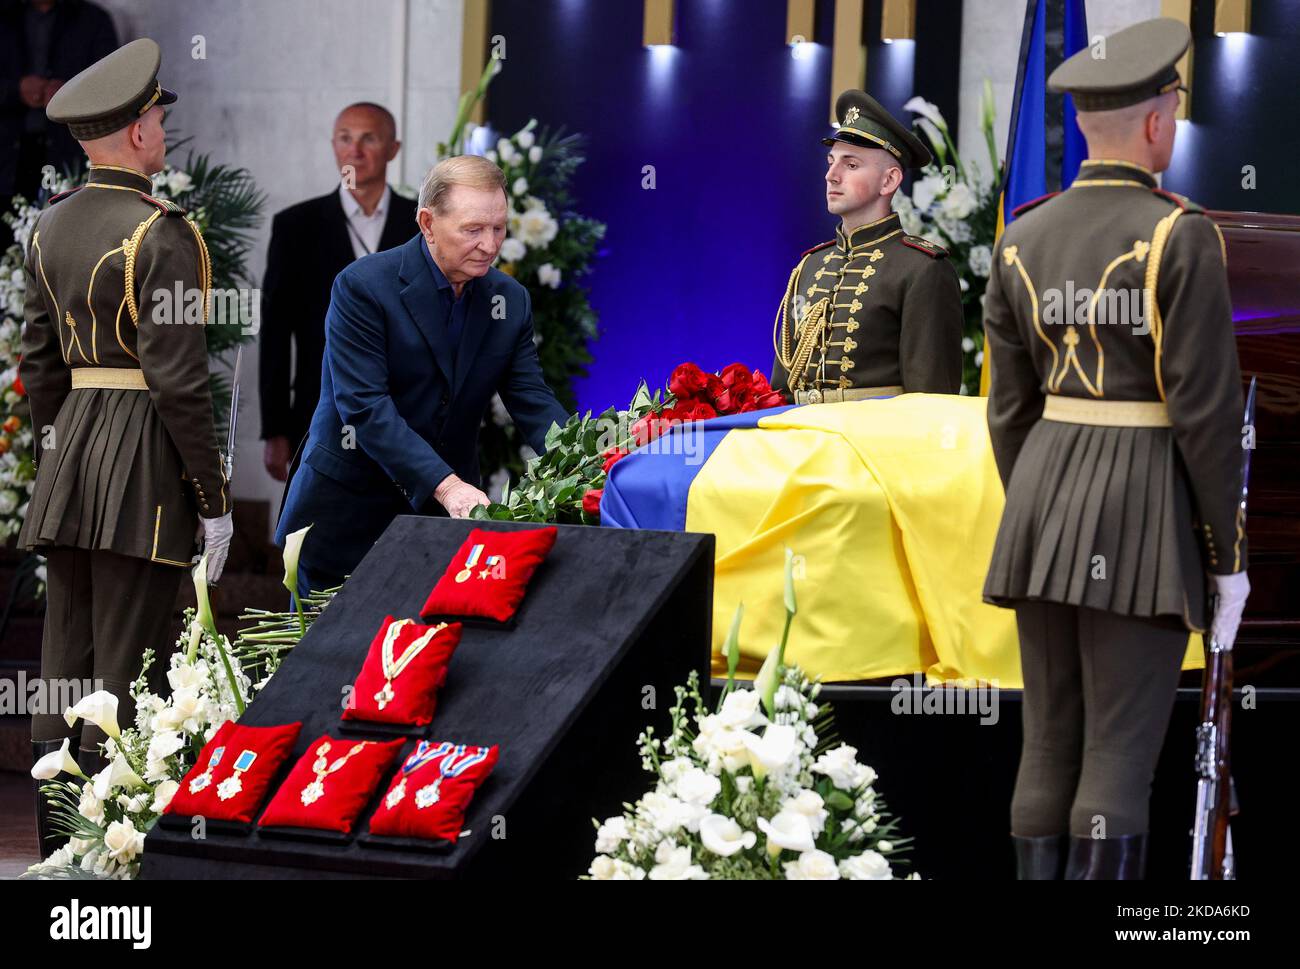 Former President of Ukraine Leonid Kuchma lays flowers near the coffin with the body of Leonid Kravchuk in Kyiv, Ukraine, May 17, 2022. Dozens of politicians, artists, scientists and average citizens attend the farewell ceremony after the first President of Independent Ukraine Leonid Kravchuk, who died May 10, 2022 in Munich, Germany. (Photo by Sergii Kharchenko/NurPhoto) Stock Photo